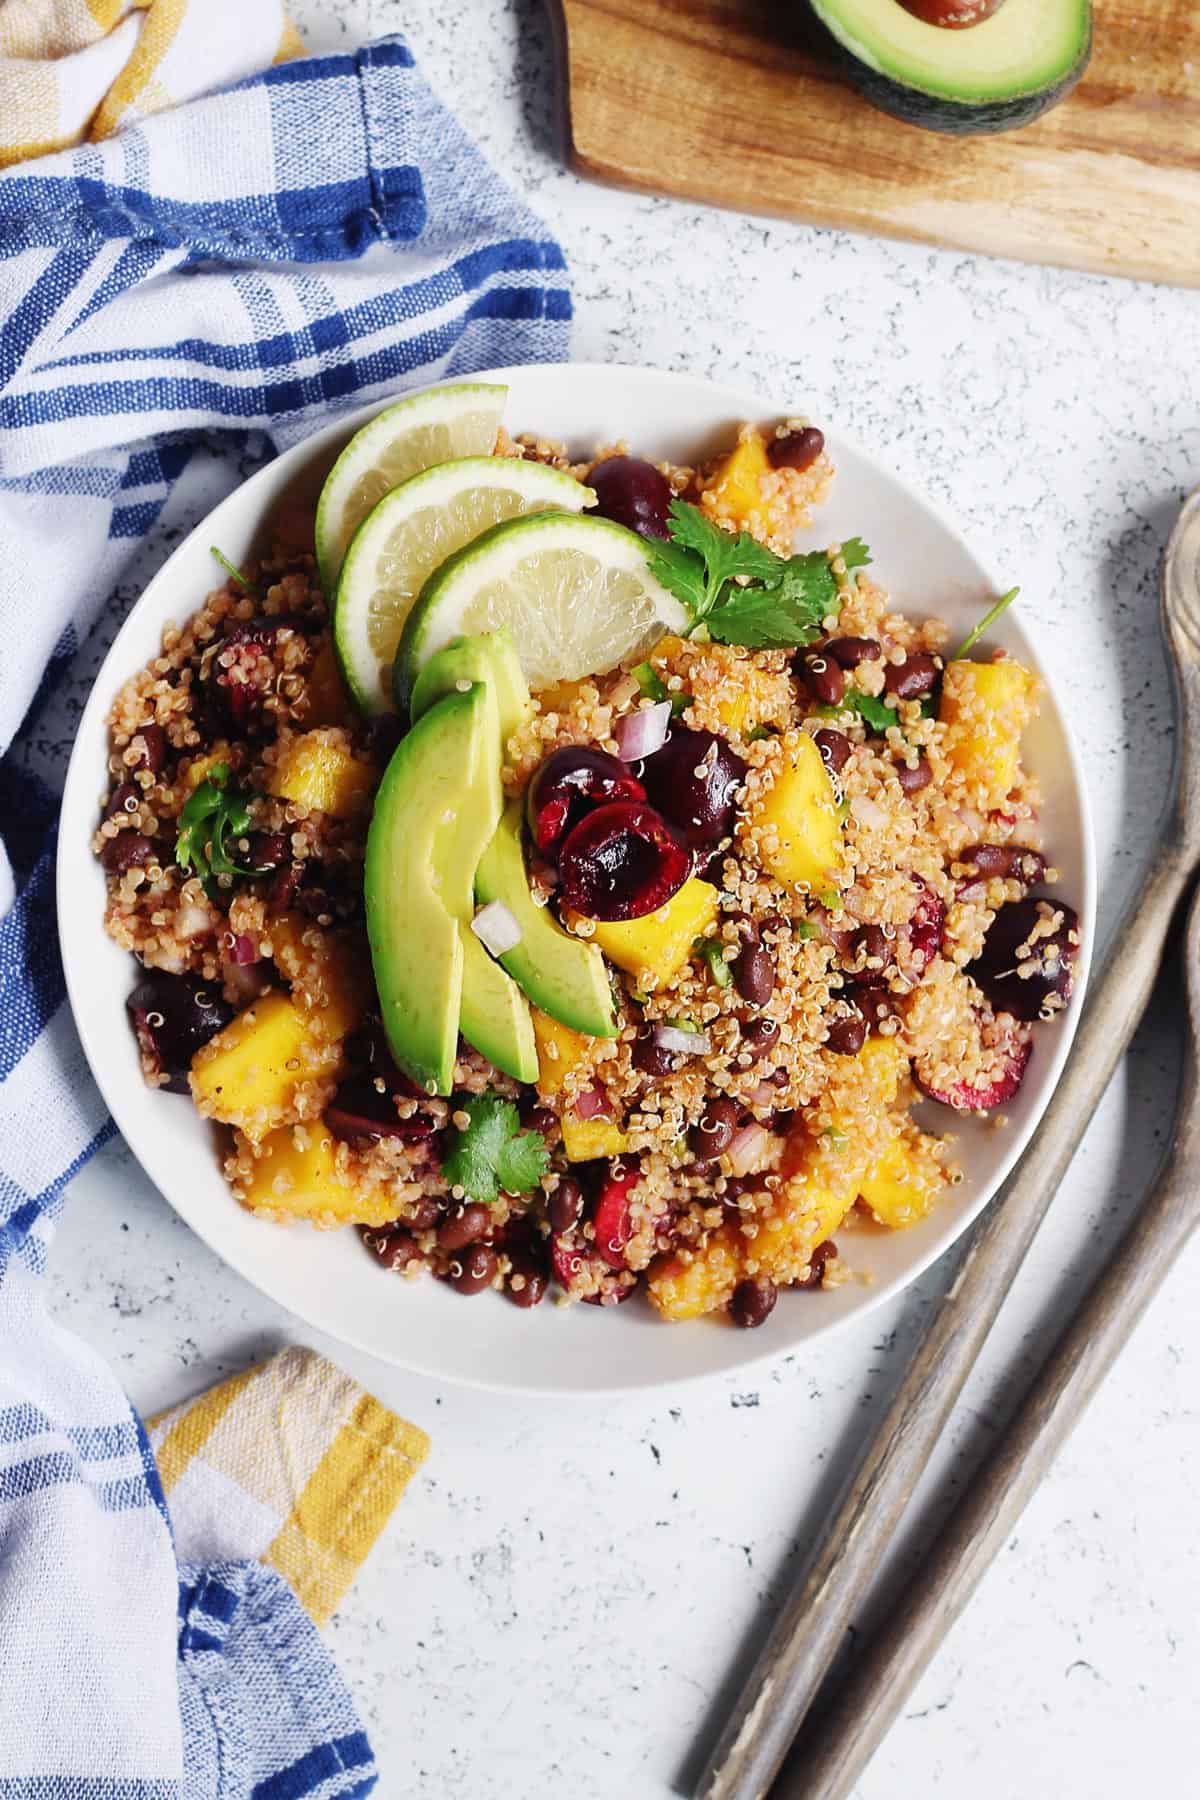 Black bean quinoa salad with avocado, cherries, and lime in a white bowl